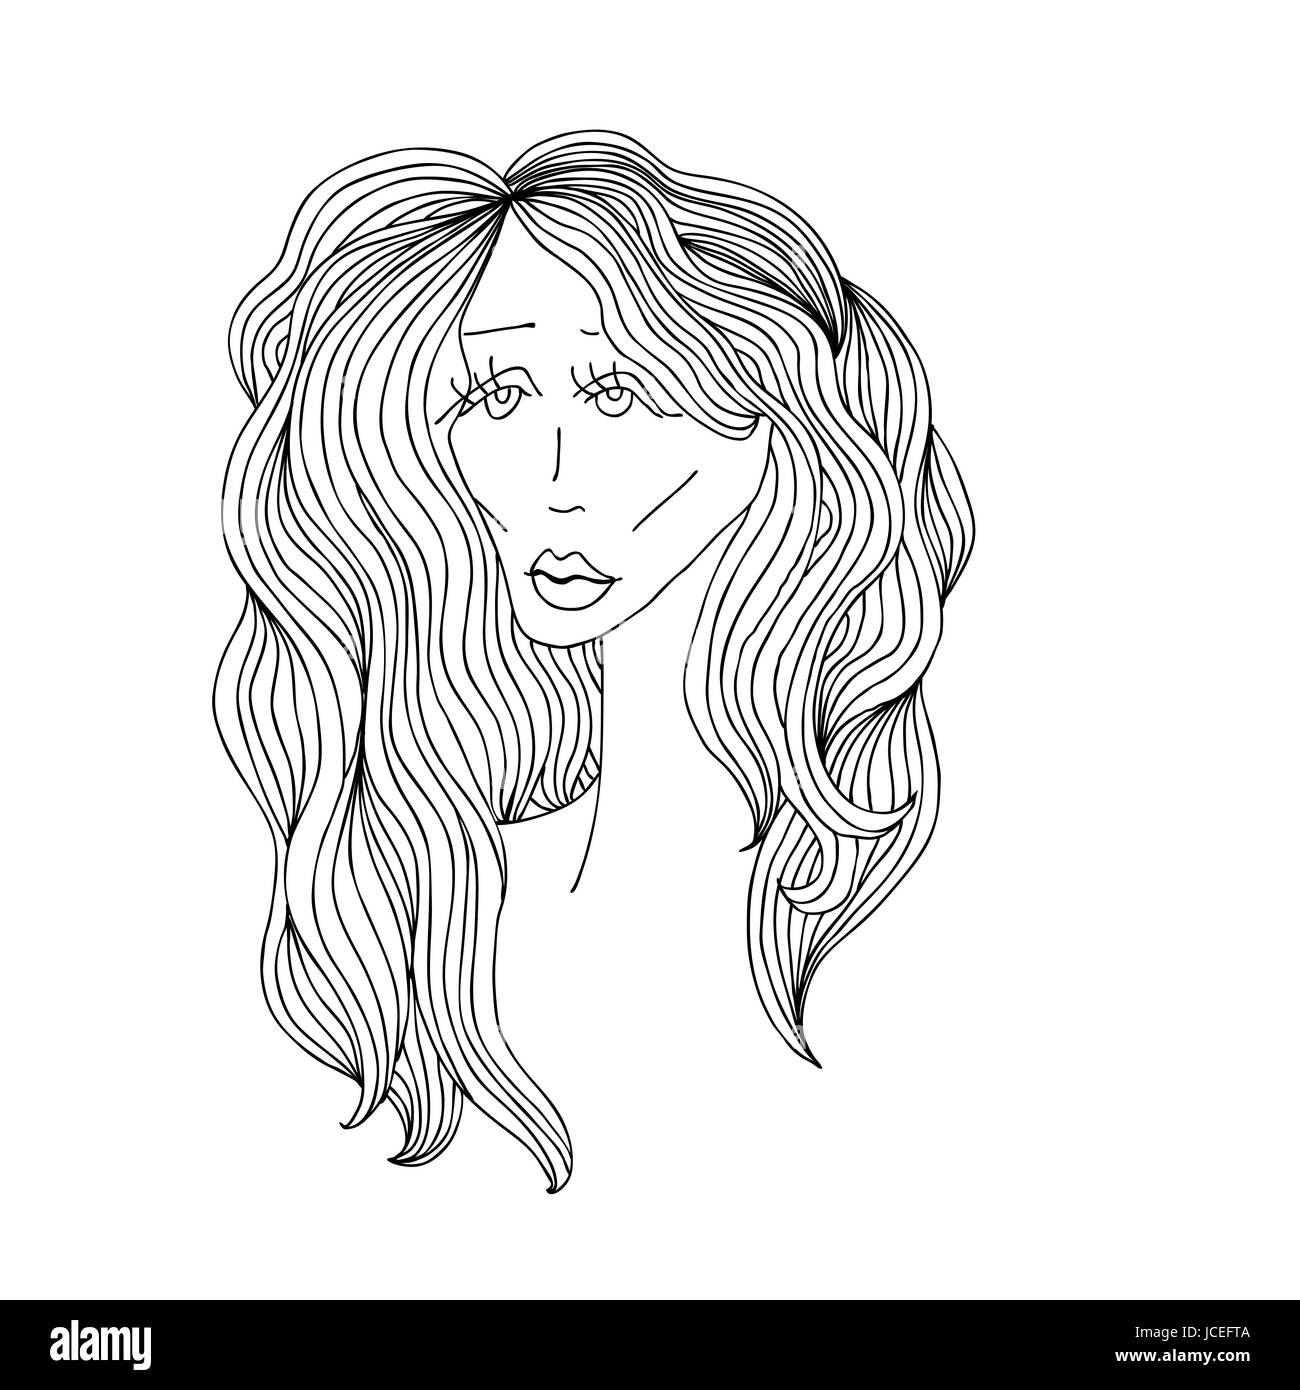 Sad woman with beautiful hair. Digital sketch grafic black and white style. Vector illustration. Stock Vector